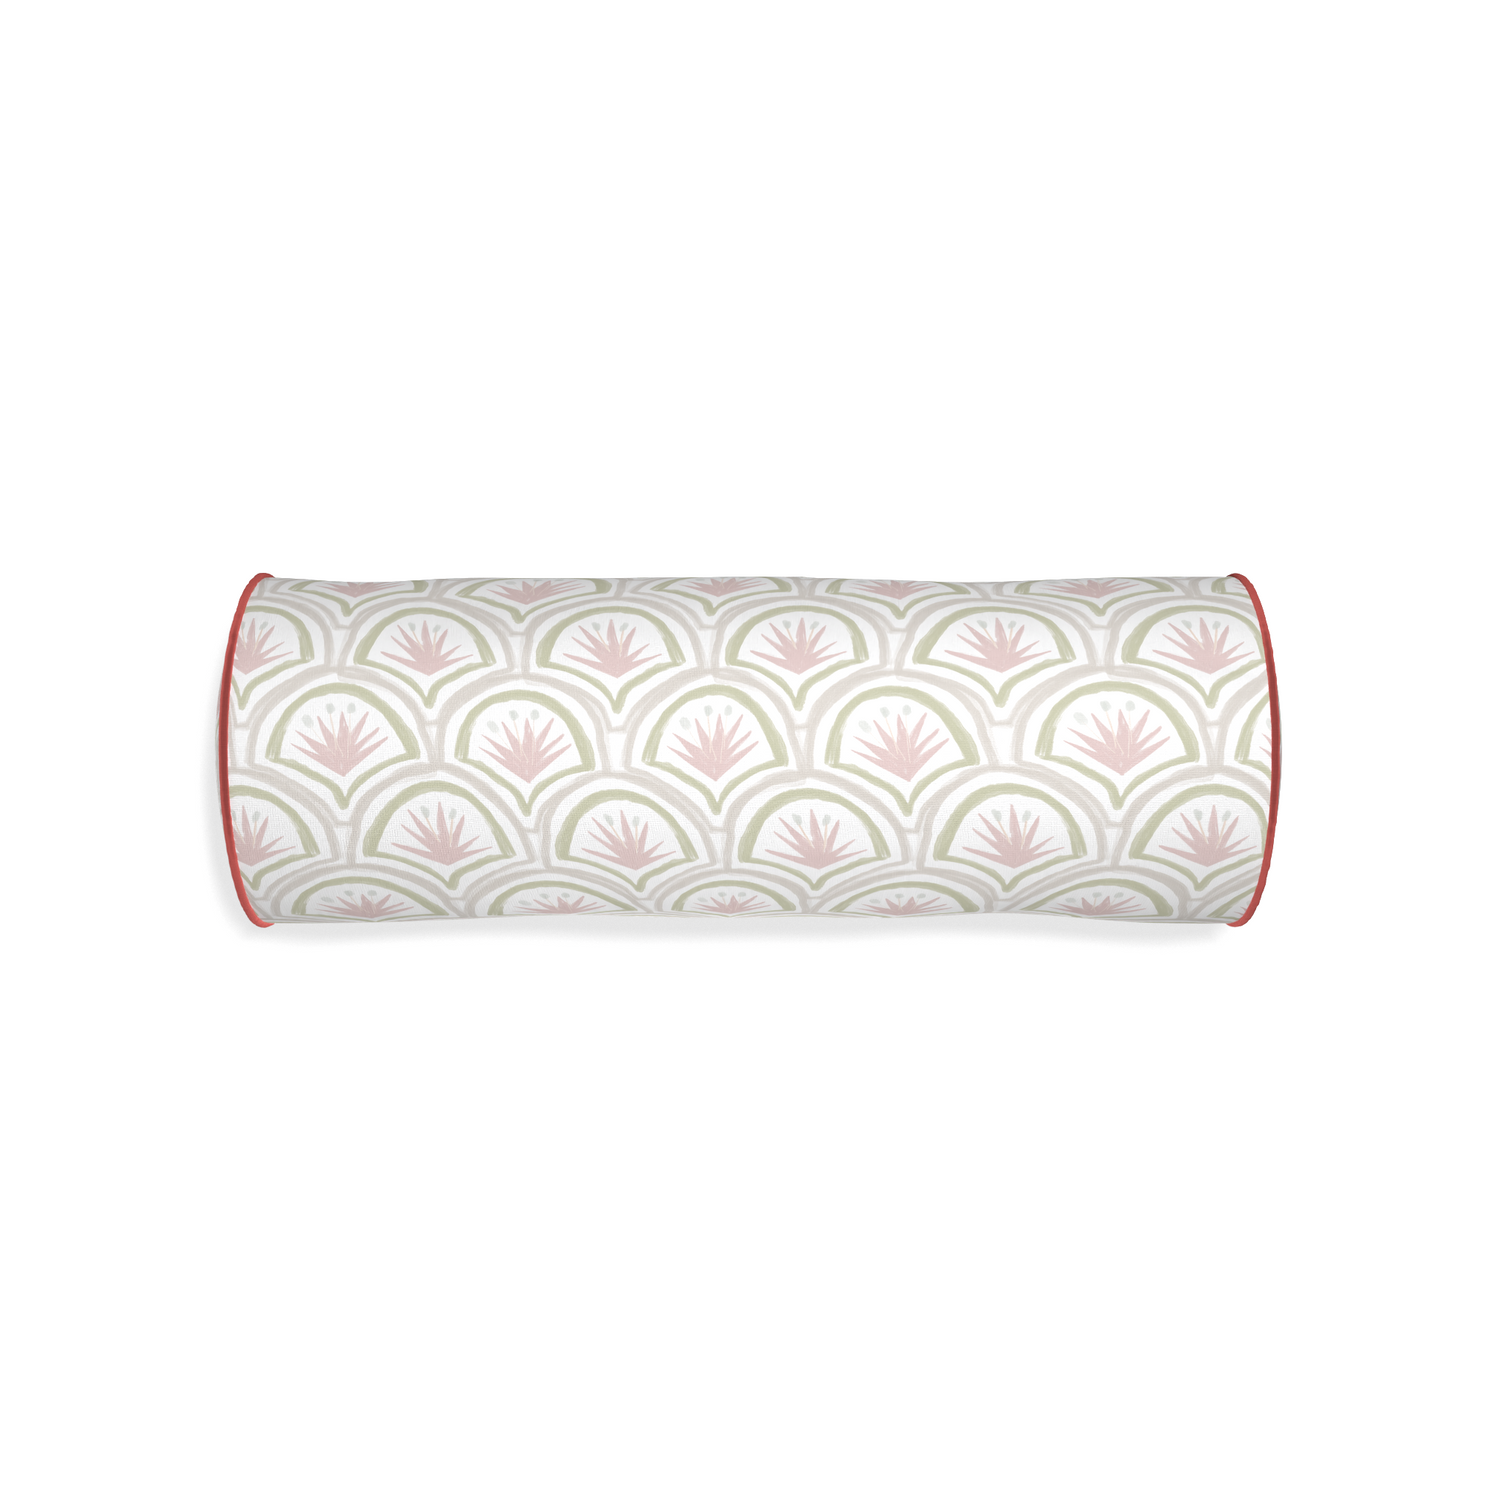 Bolster thatcher rose custom pink & green palmpillow with c piping on white background